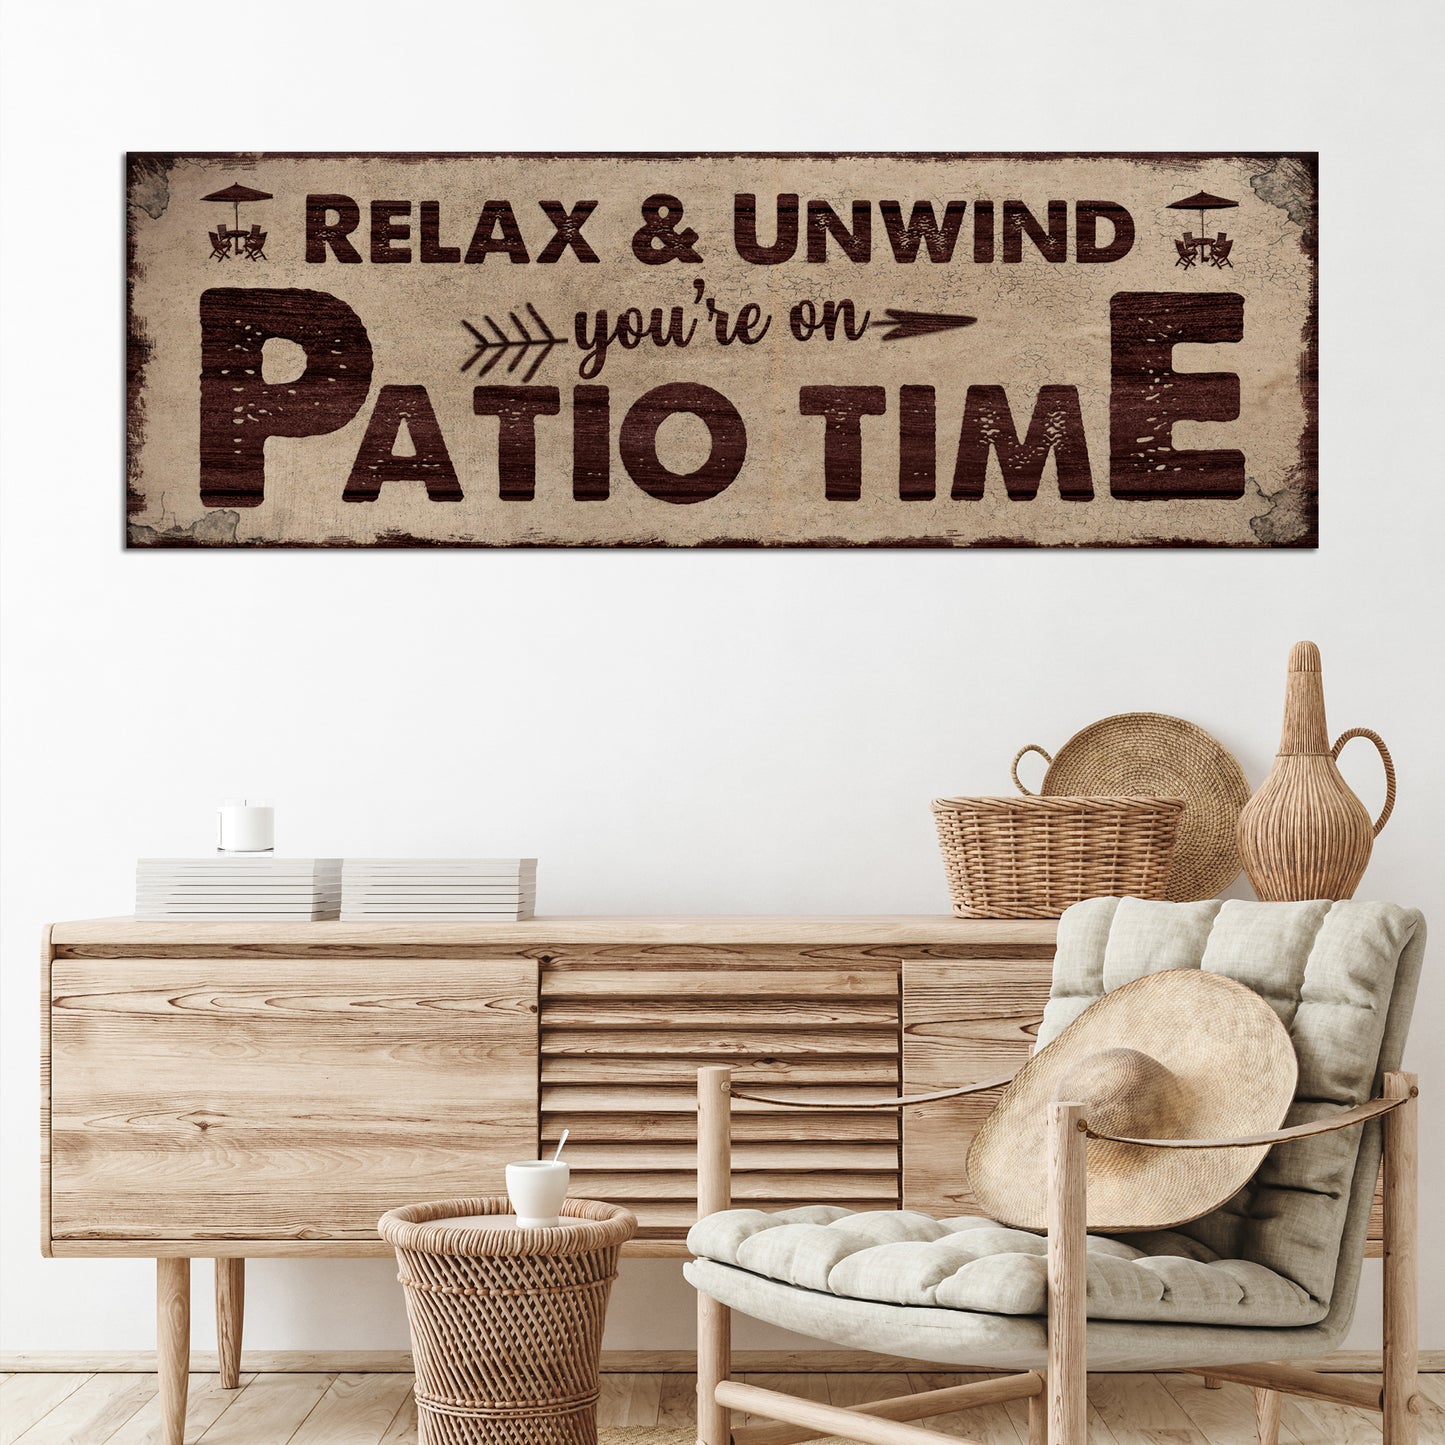 Patio Time Sign - Image by Tailored Canvases